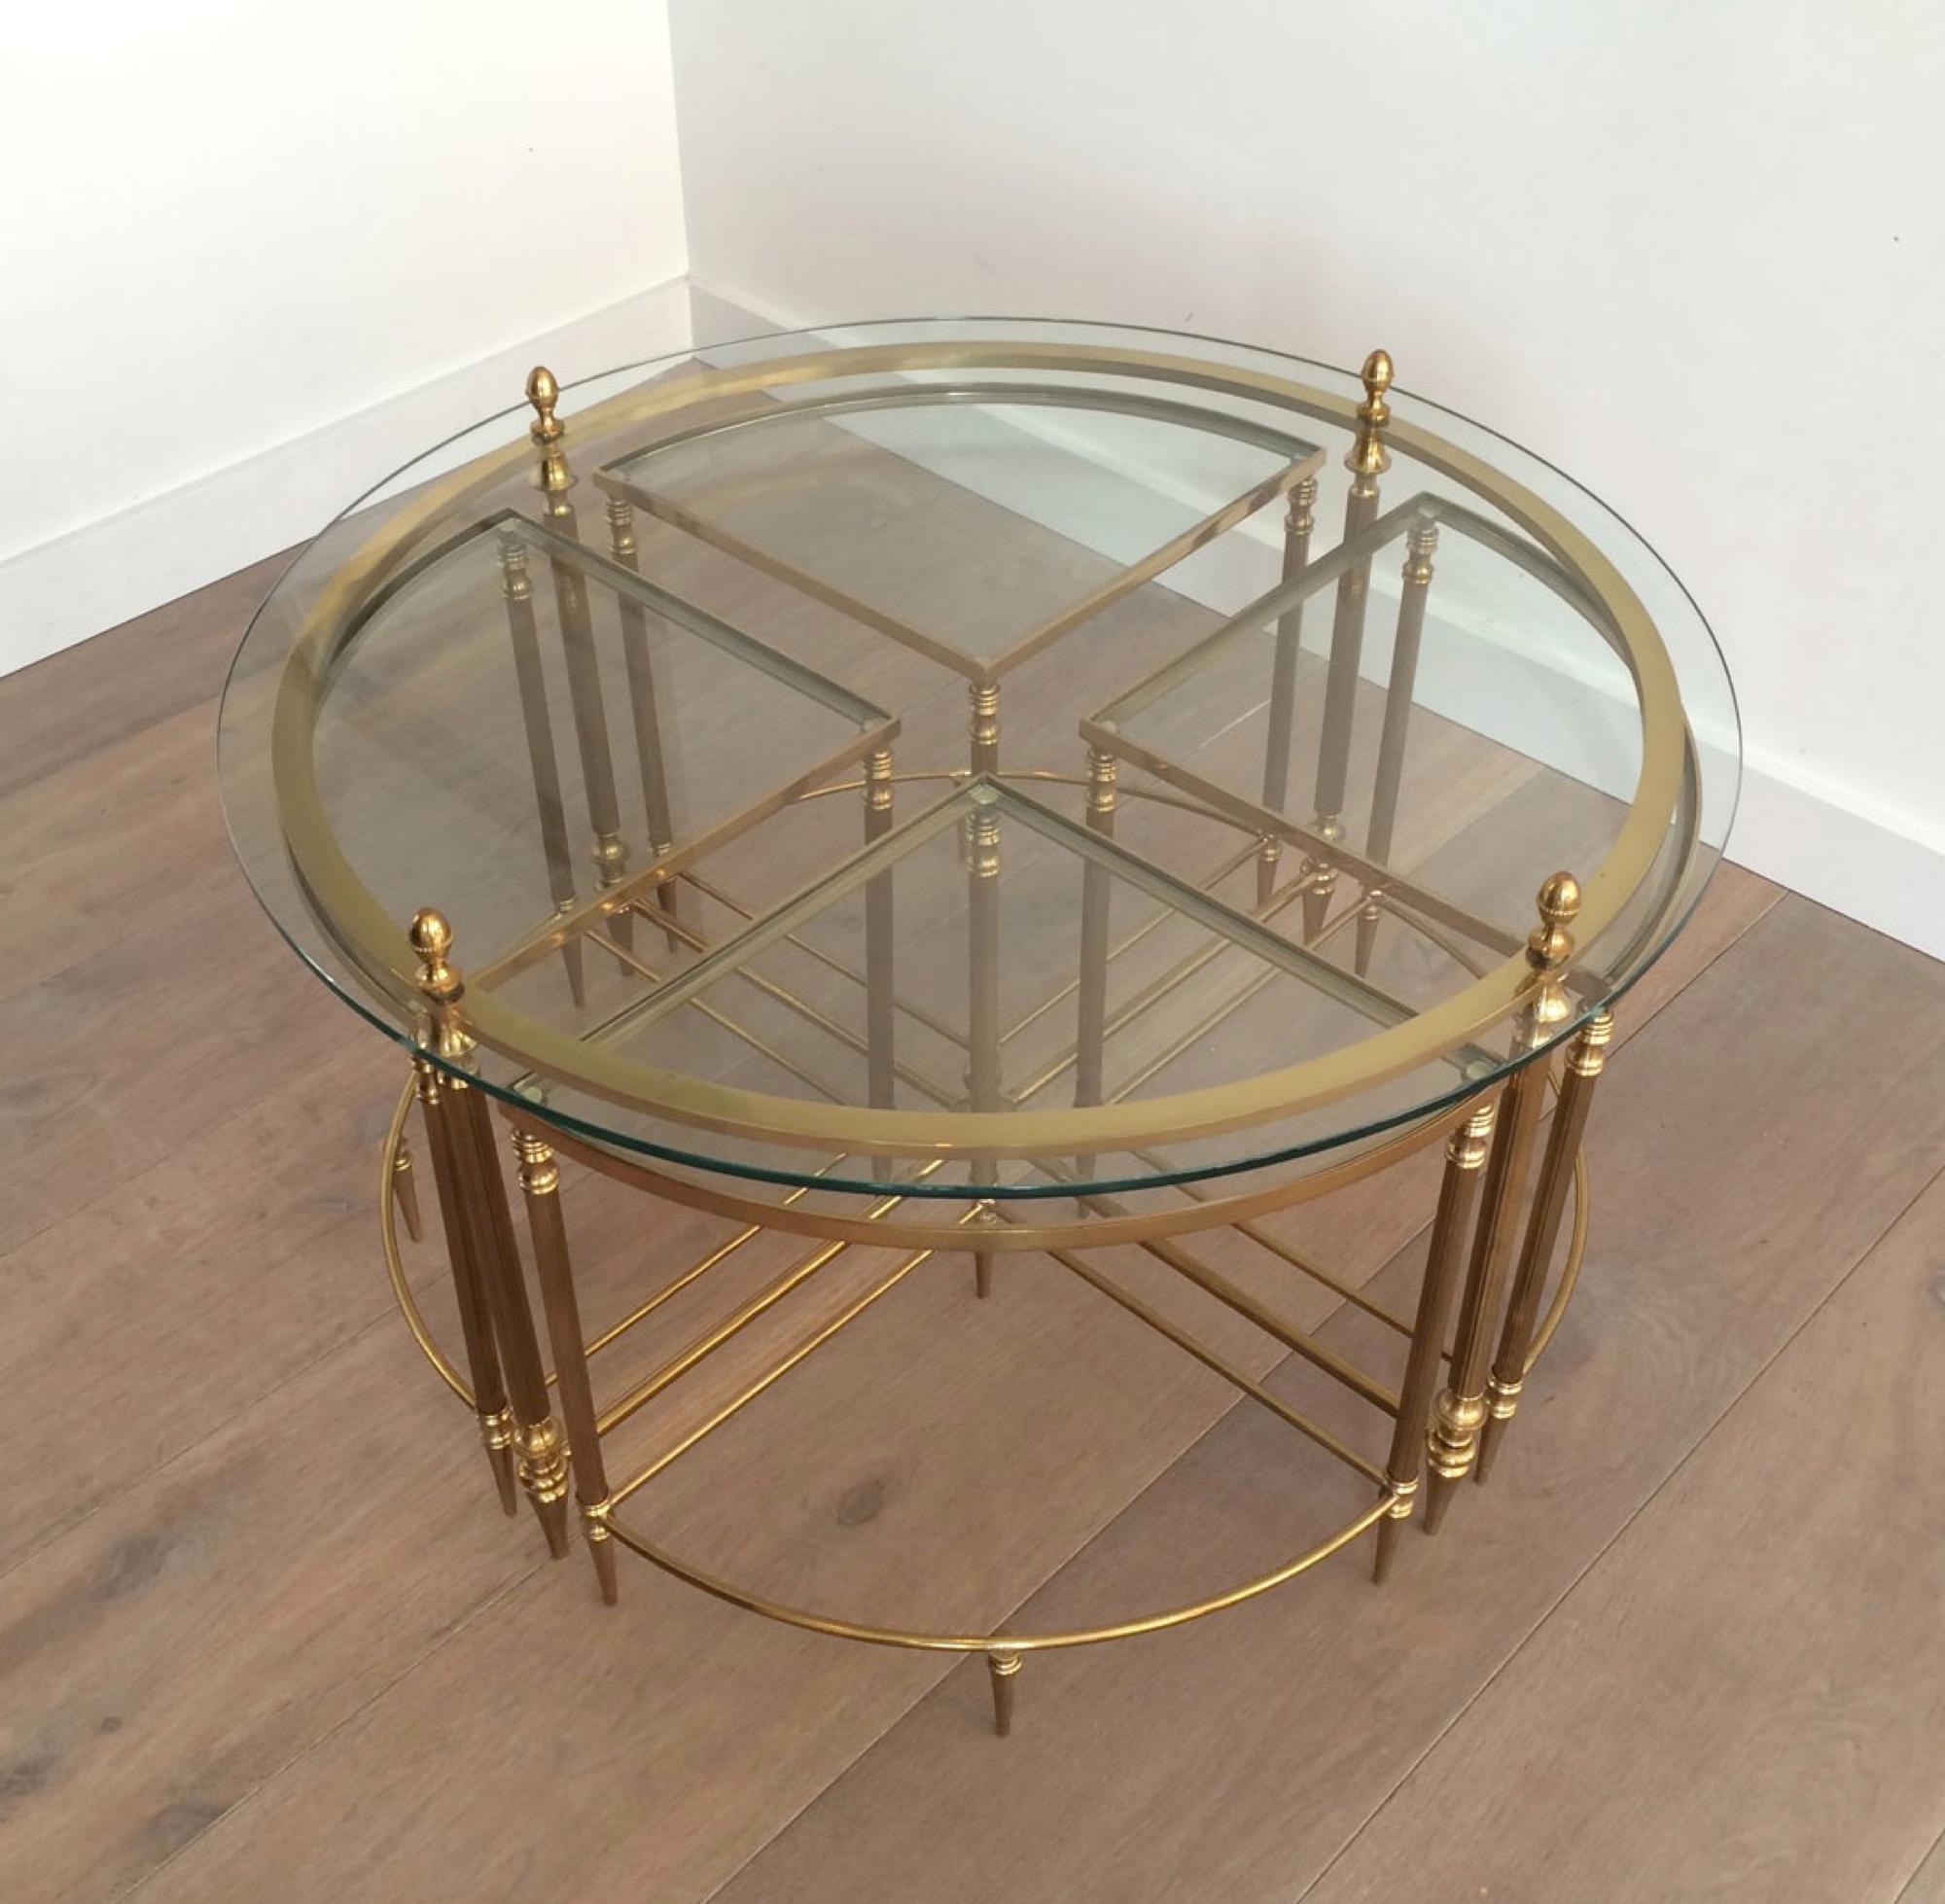 Neoclassical Round Brass Coffee Table with 4 nesting Tables by Maison Bagués For Sale 5